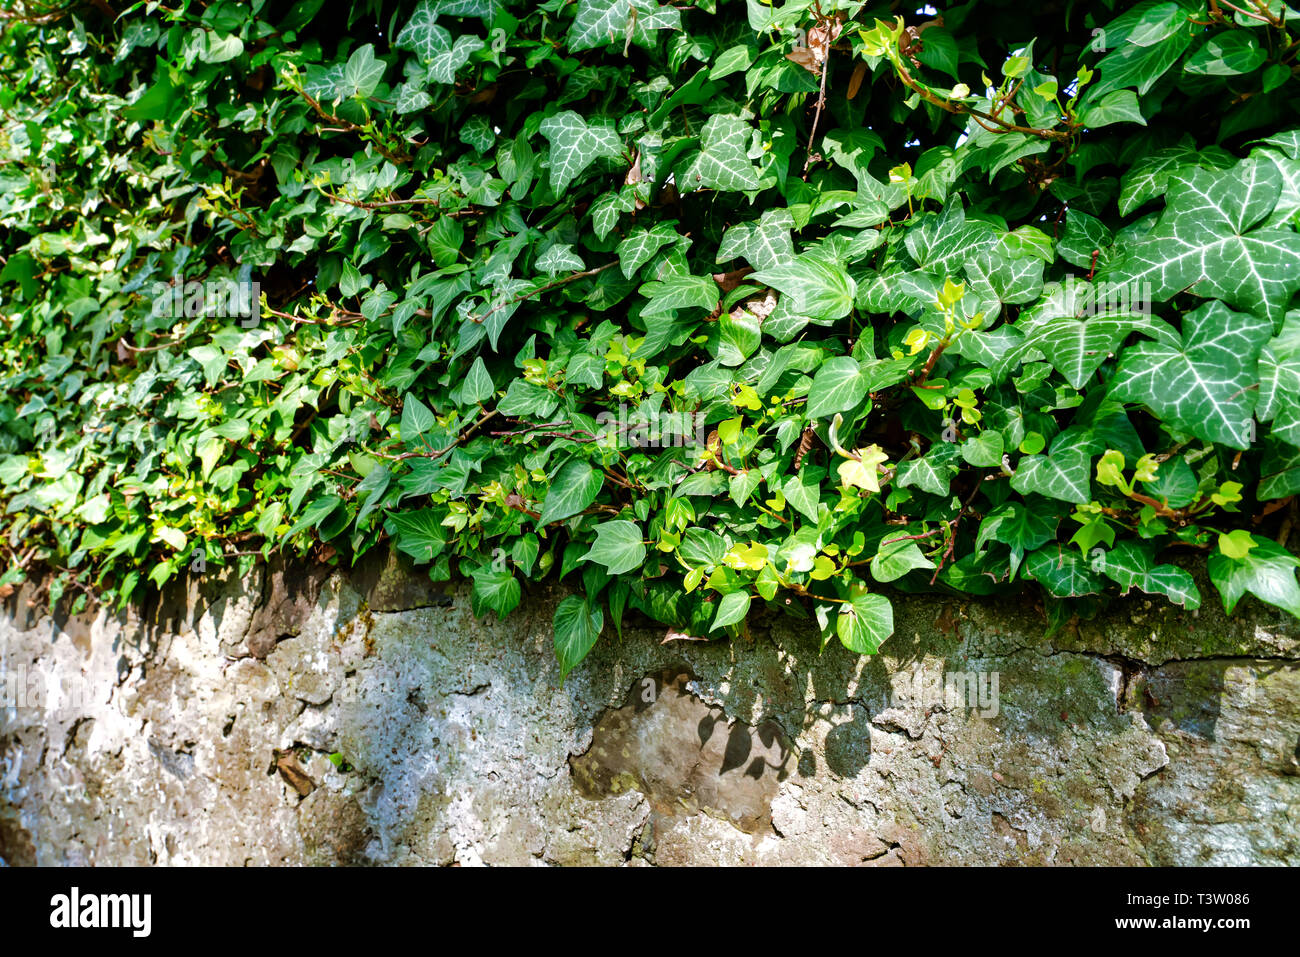 Ivy, Hedera helix is an evergreen climbing plant growing high where suitable surfaces (trees, cliffs, walls) are available Stock Photo